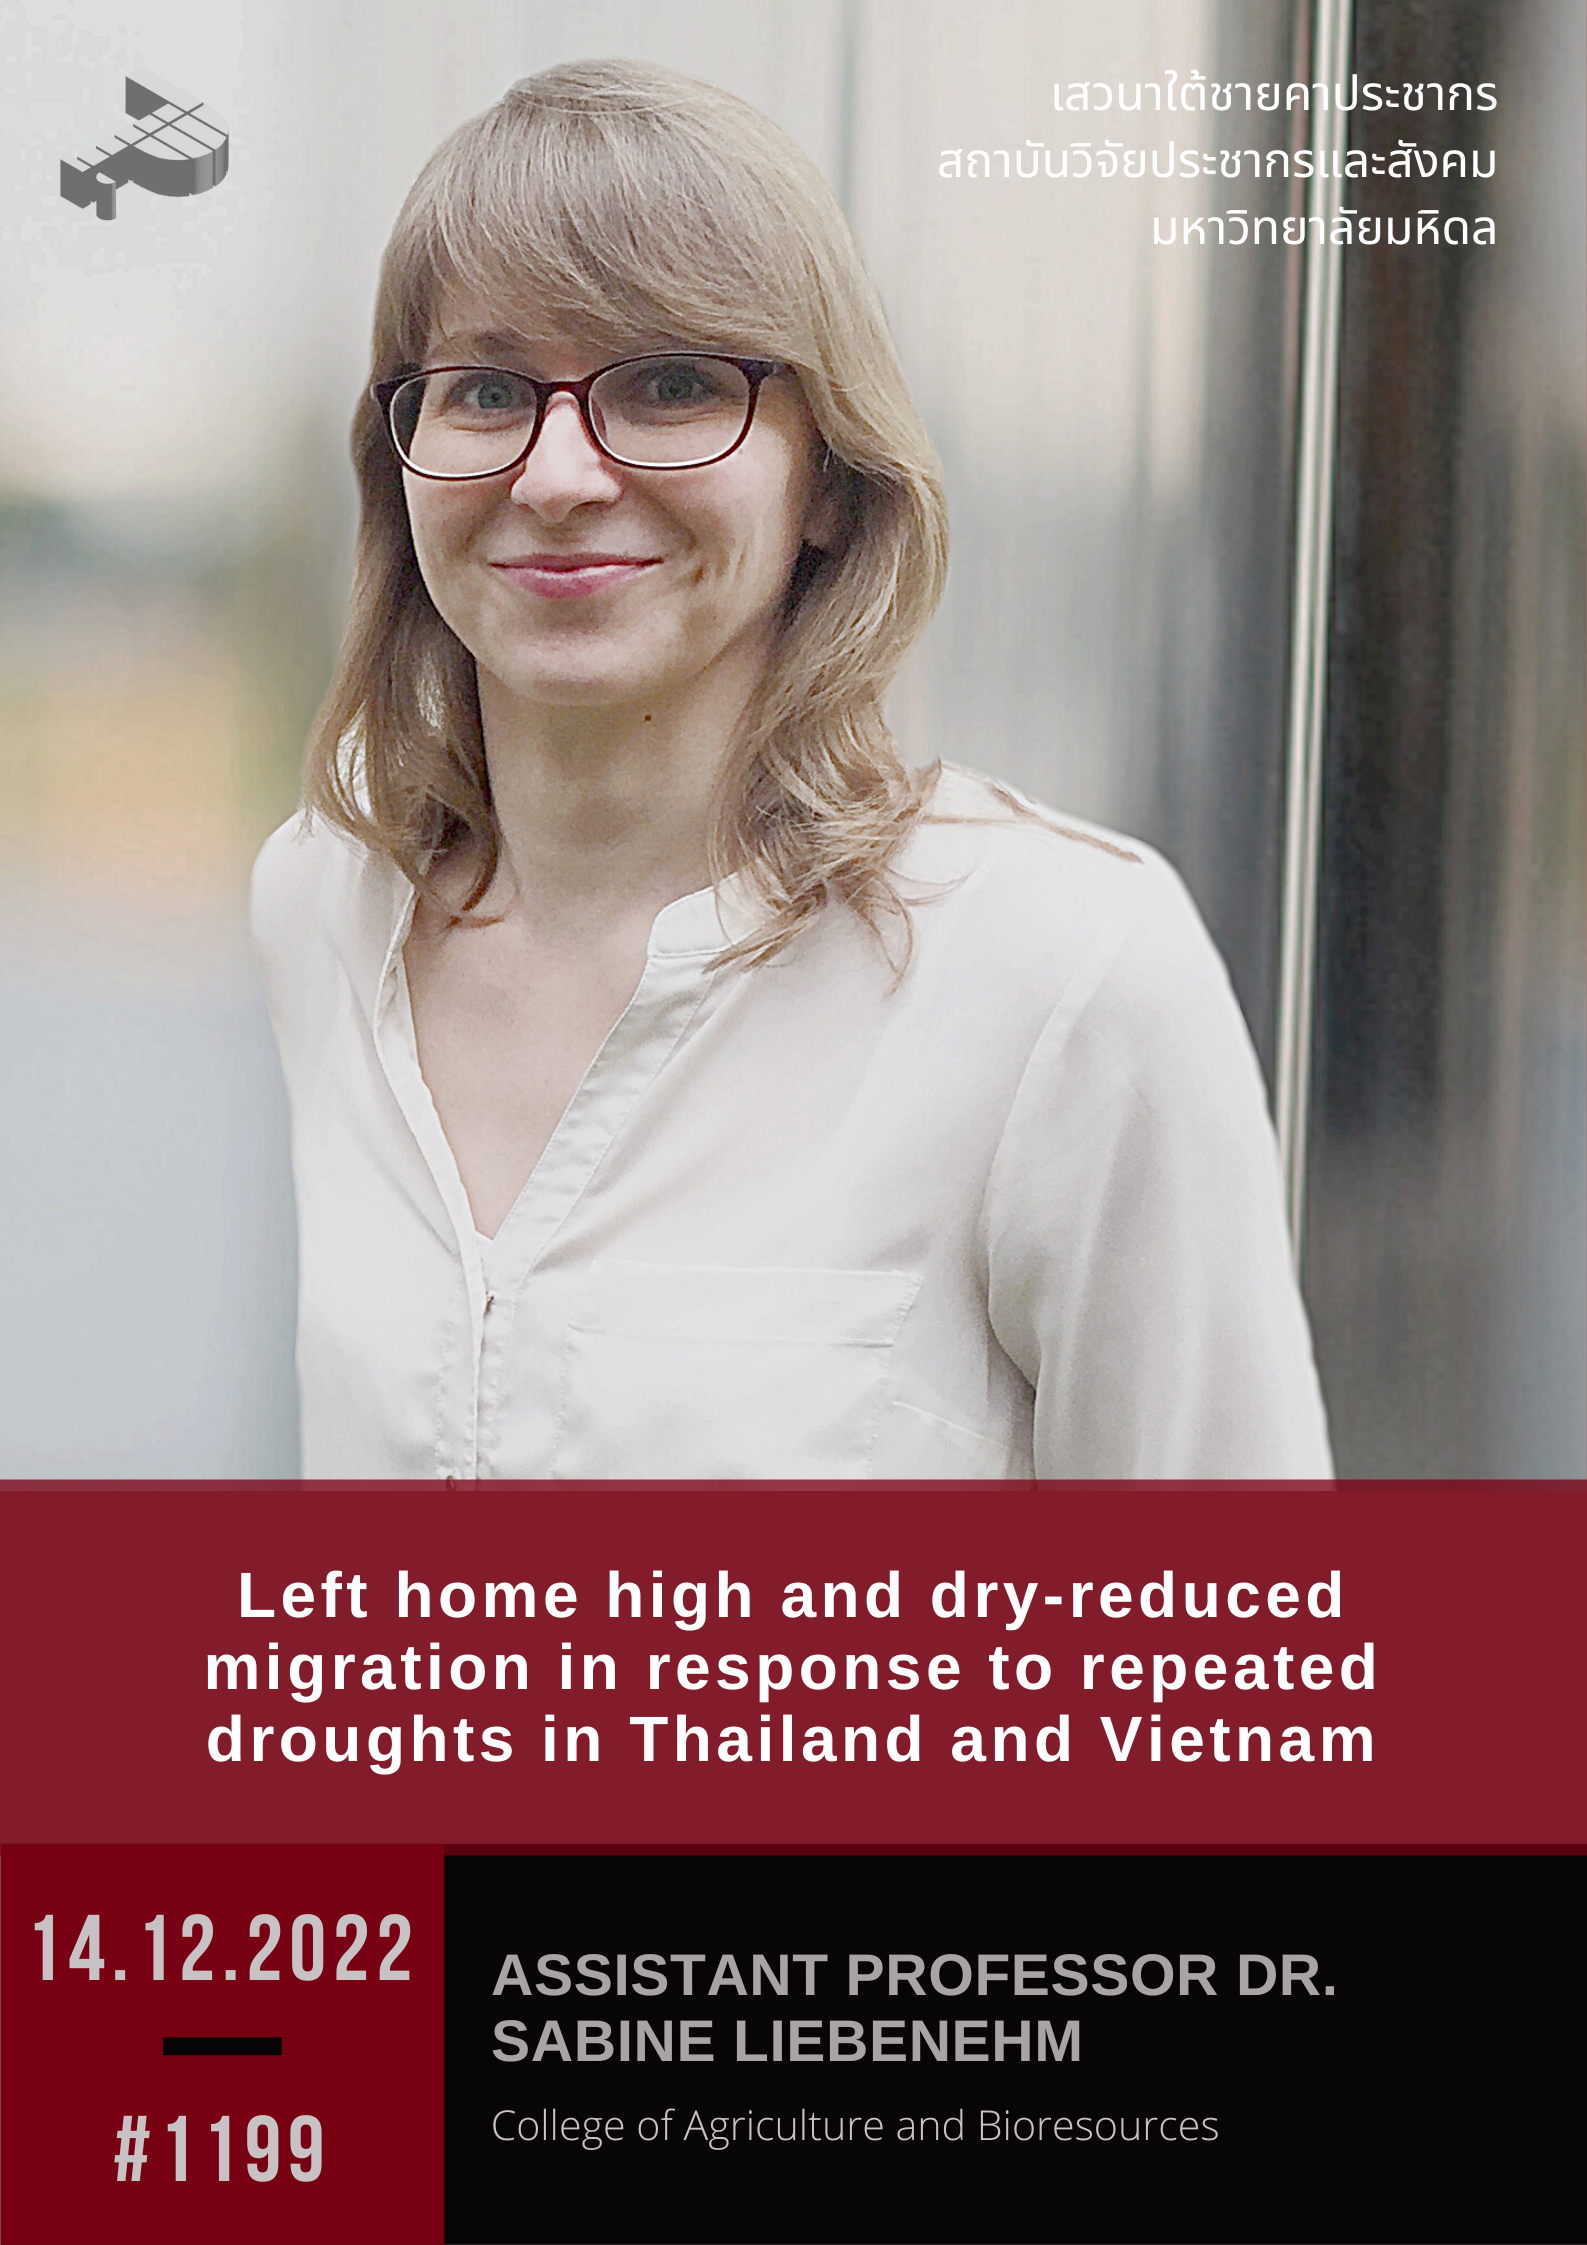 Left home high and dry-reduced migration in response to repeated droughts in Thailand and Vietnam